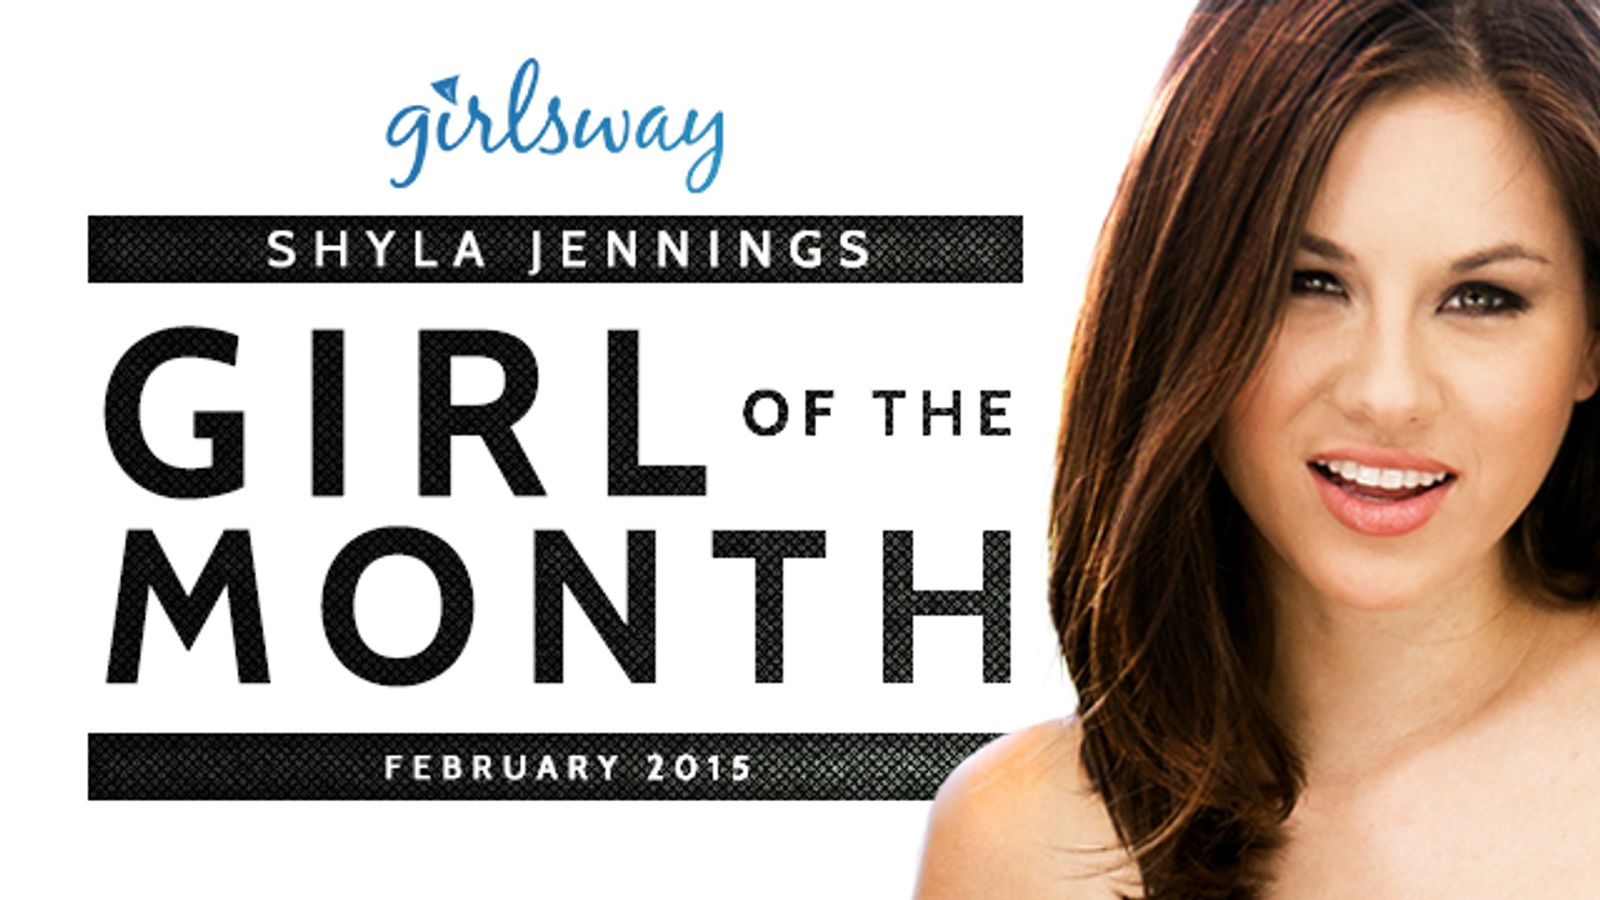 Shyla Jennings is Girlsway Girl of the Month for February